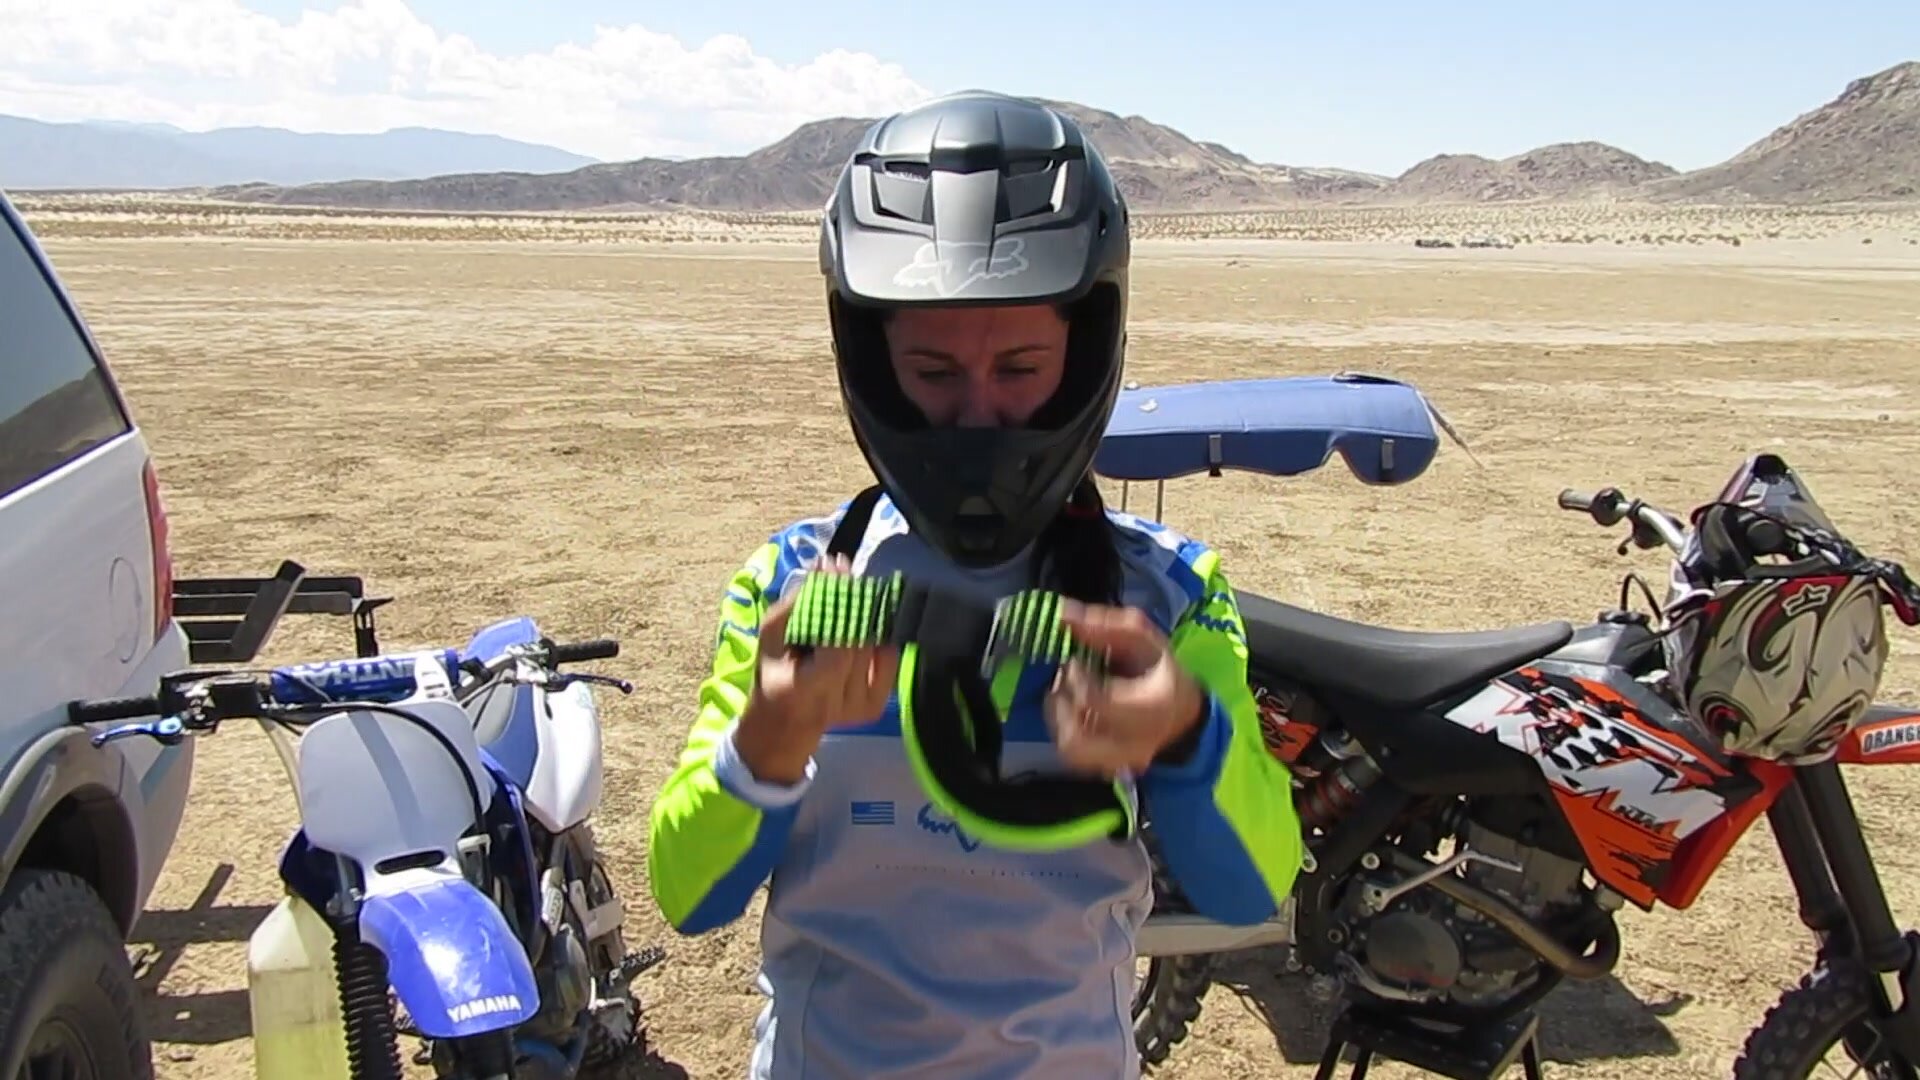 Dazzling housewife riding motorcycle stops in the desert with partner to have oral sexual intercourse picture